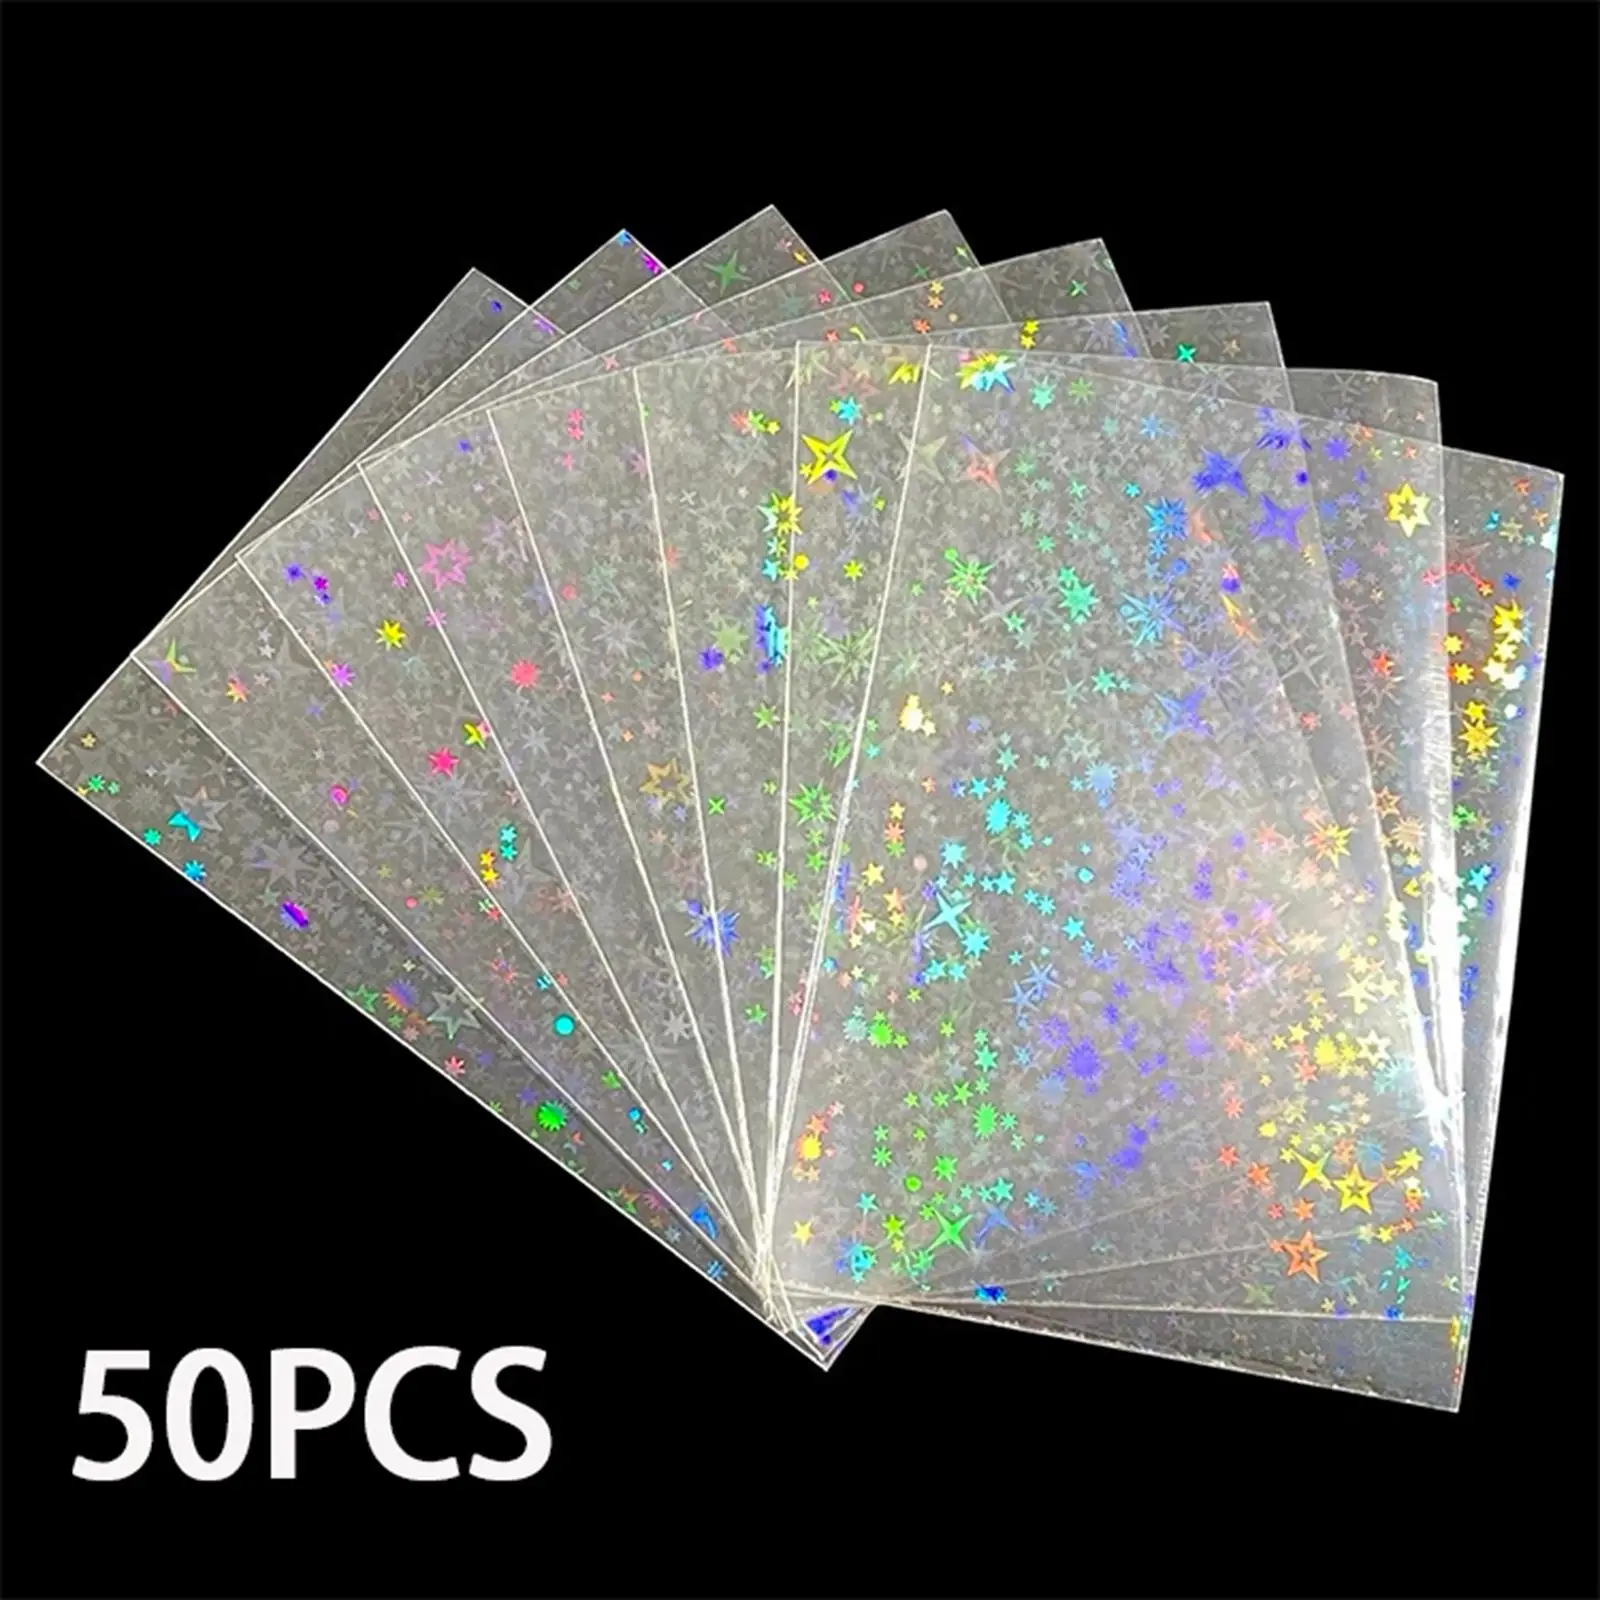 50 Pieces Holographic Card Sleeve Stardard Size Card Cover Game Card Sleeves Card Protective Holder Trading Card Cover